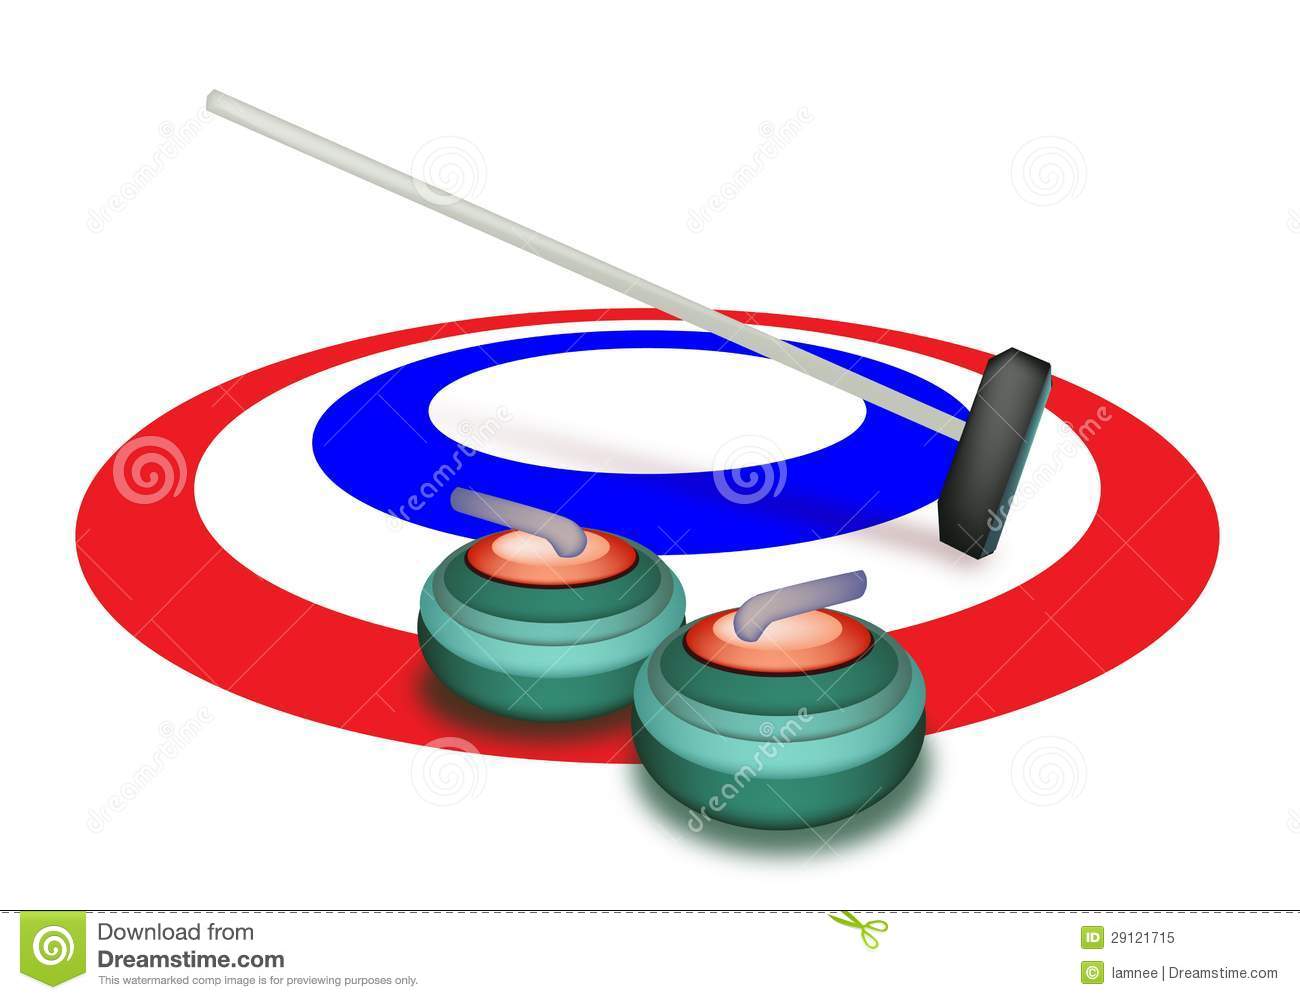 Collection Of Curling Stones On Ice Royalty Free Stock Photo   Image    